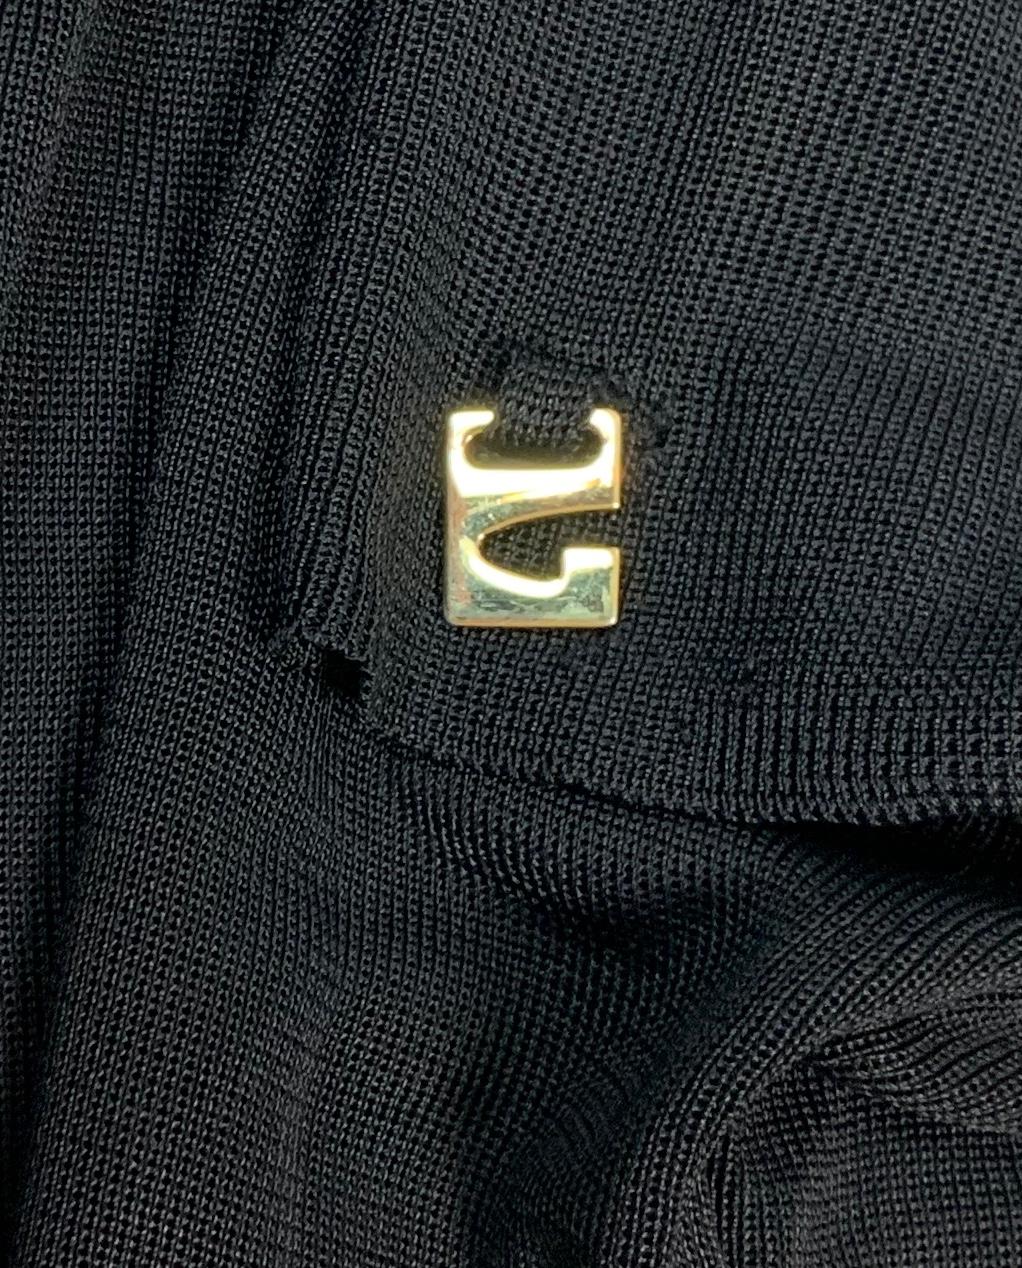 F/W 1997 Gucci Tom Ford Semi-Sheer Black Knit Military Style Shirt Top In Good Condition In Yukon, OK